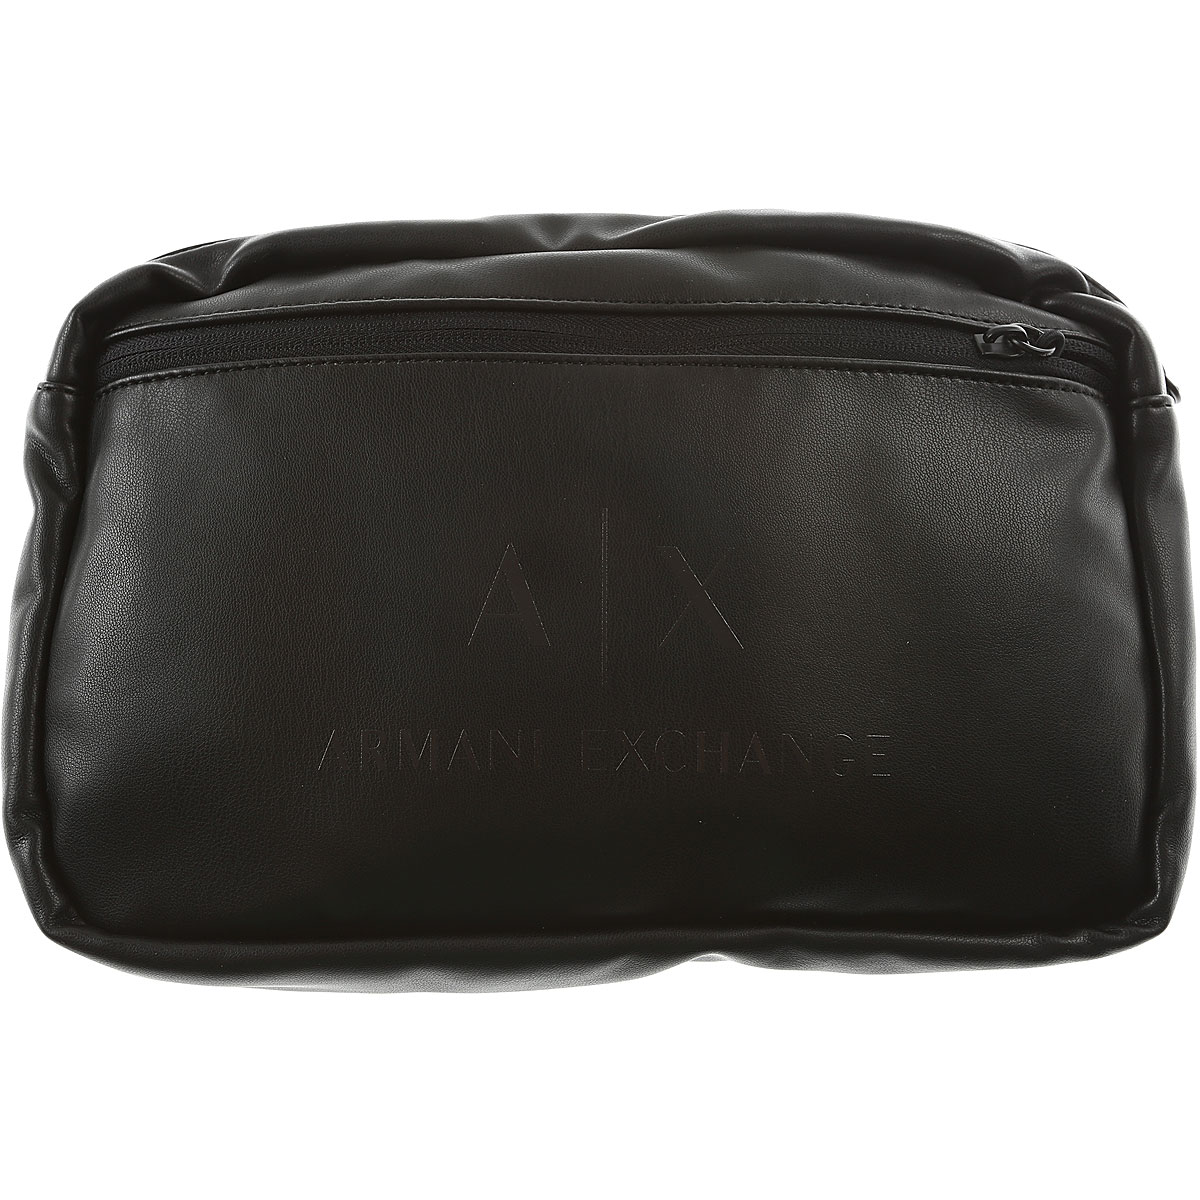 Armani Jeans Besace Homme, Noir, Polyester, 2017